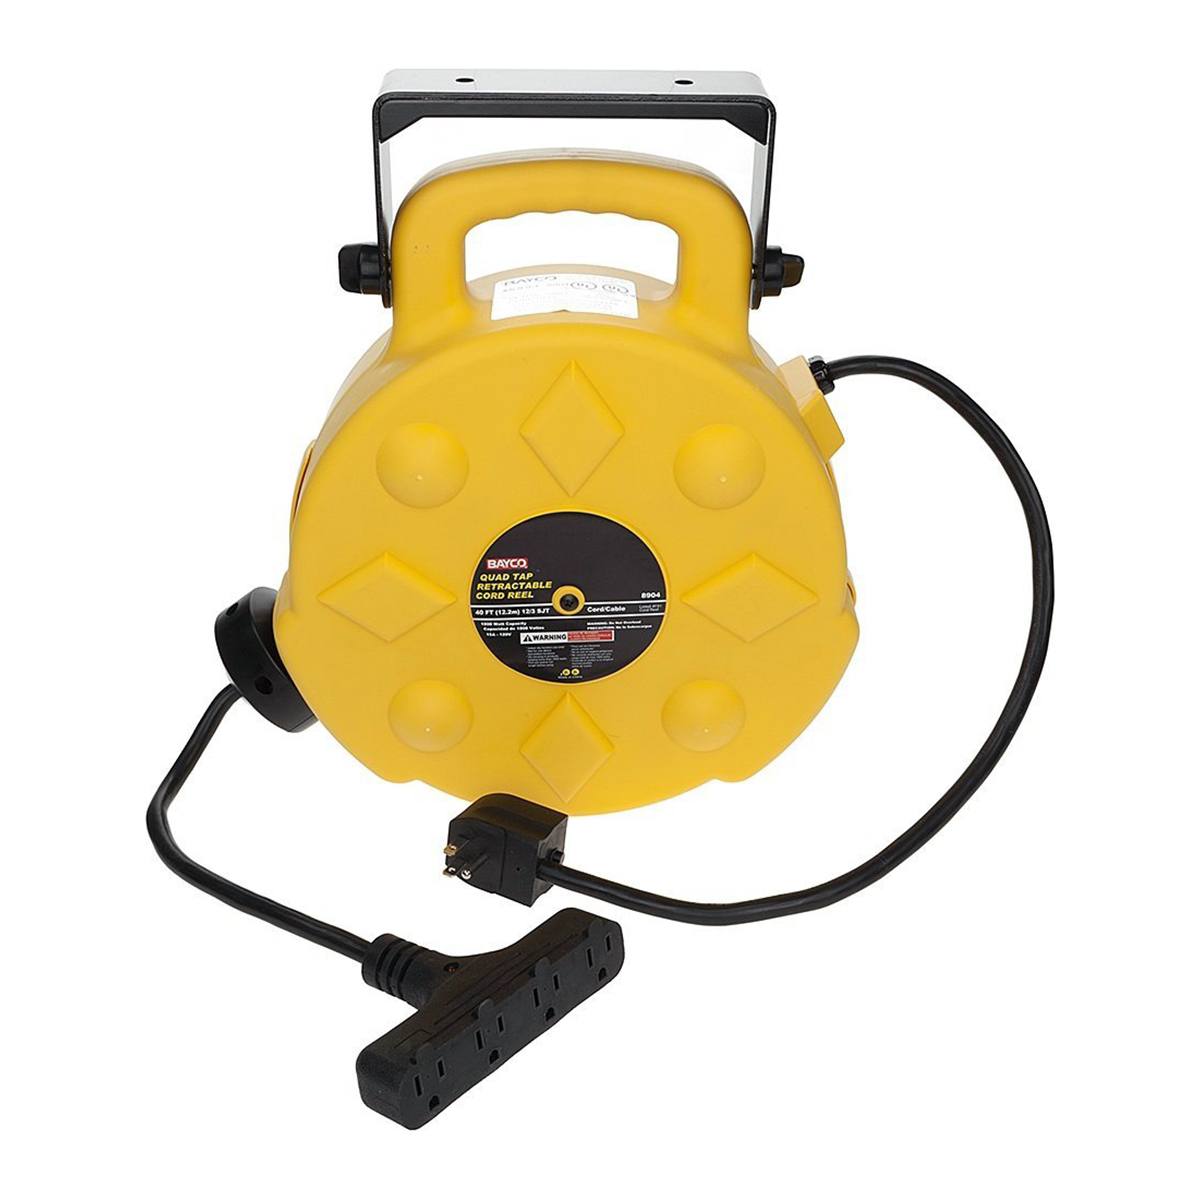 PRIME 3 Outlet 40 ft. (12.2 m) Heavy-duty Retractable Cord Reel